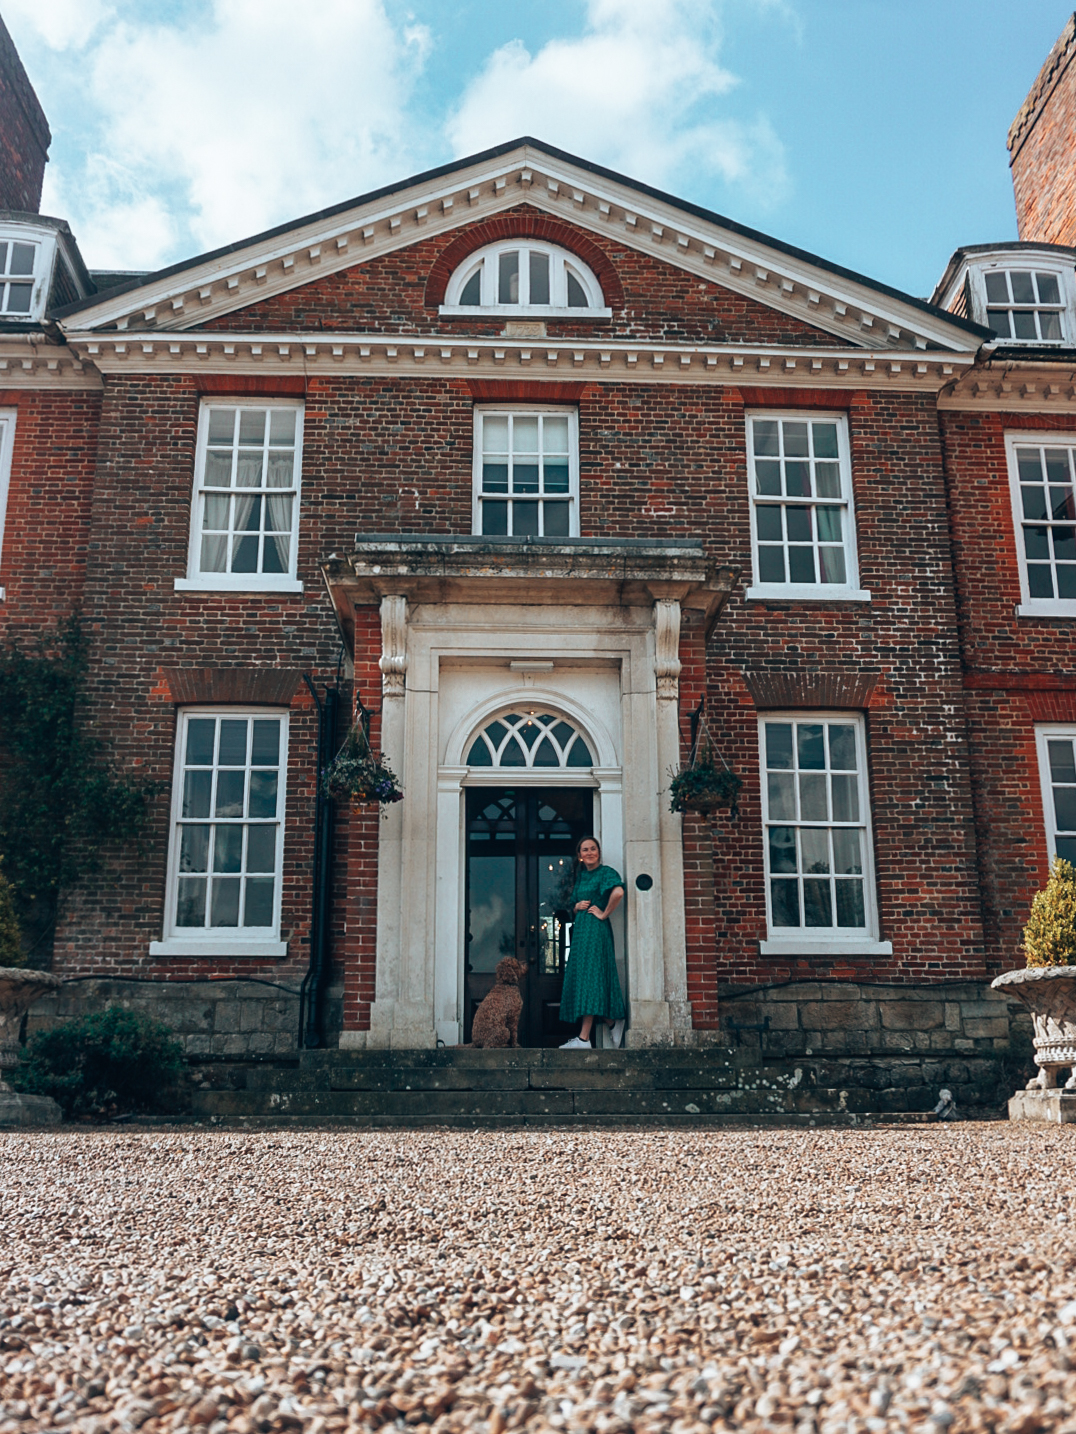 Chilston Park Hotel, a luxury Country House Hotel